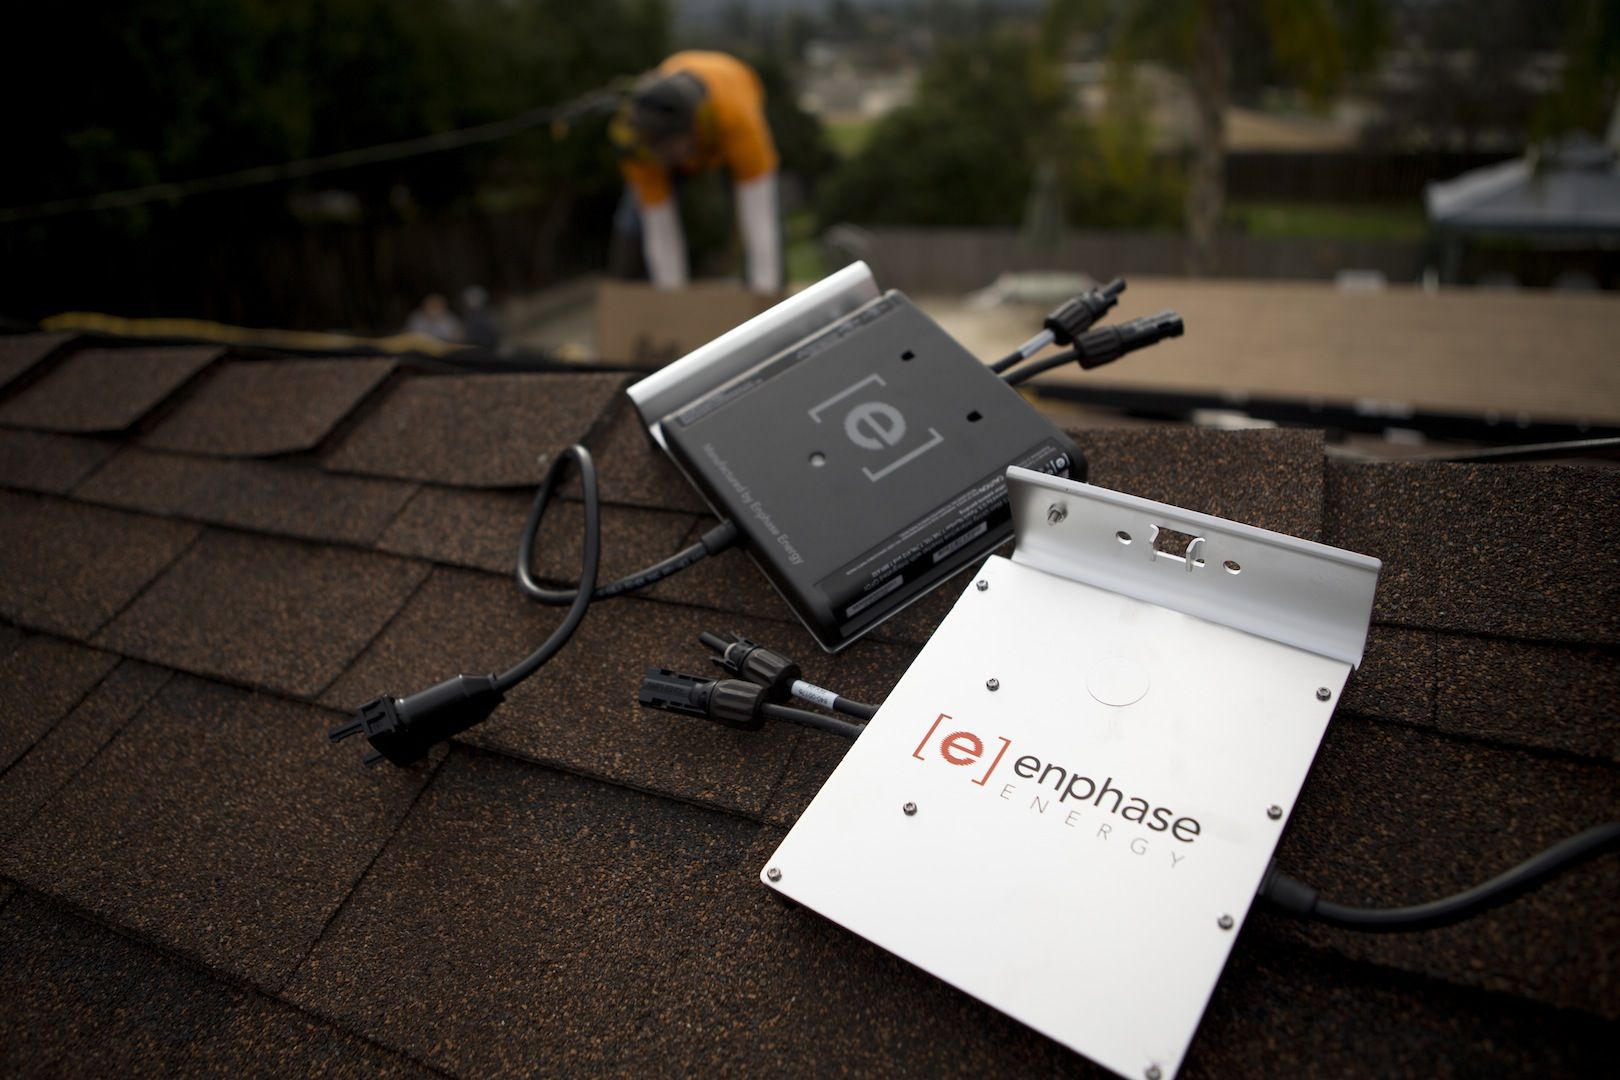 4th Generation Enphase Micro Inverters for Solar Systems